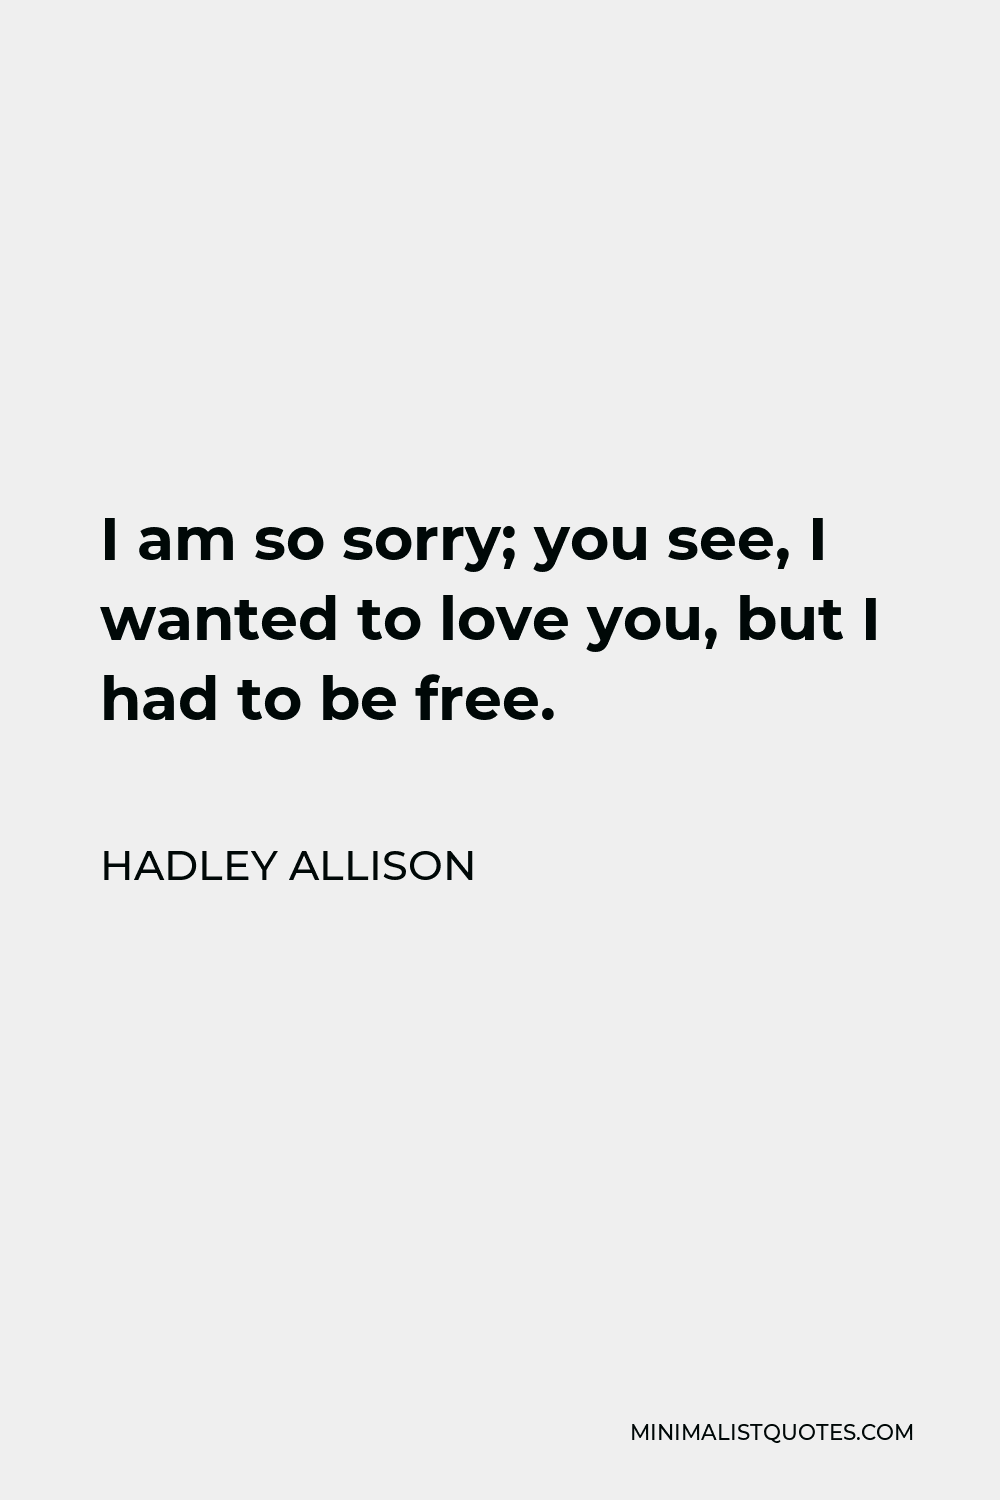 Hadley Allison Quote - I am so sorry; you see, I wanted to love you, but I had to be free.